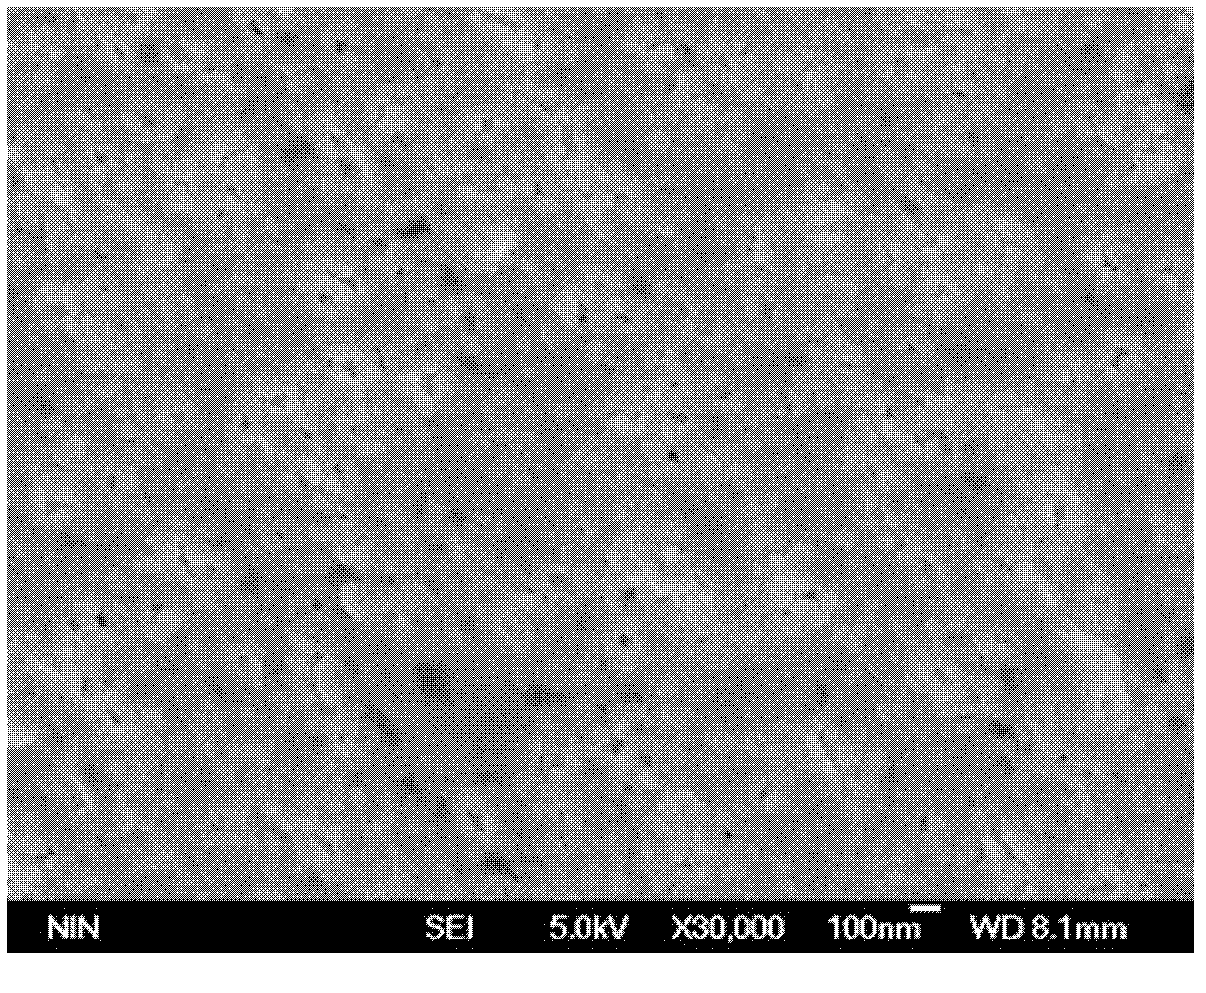 Method for preparing Nd/Co-codoped BiFeO3 film on FTO (fluorine-doped tin oxide)/glass substrate surface